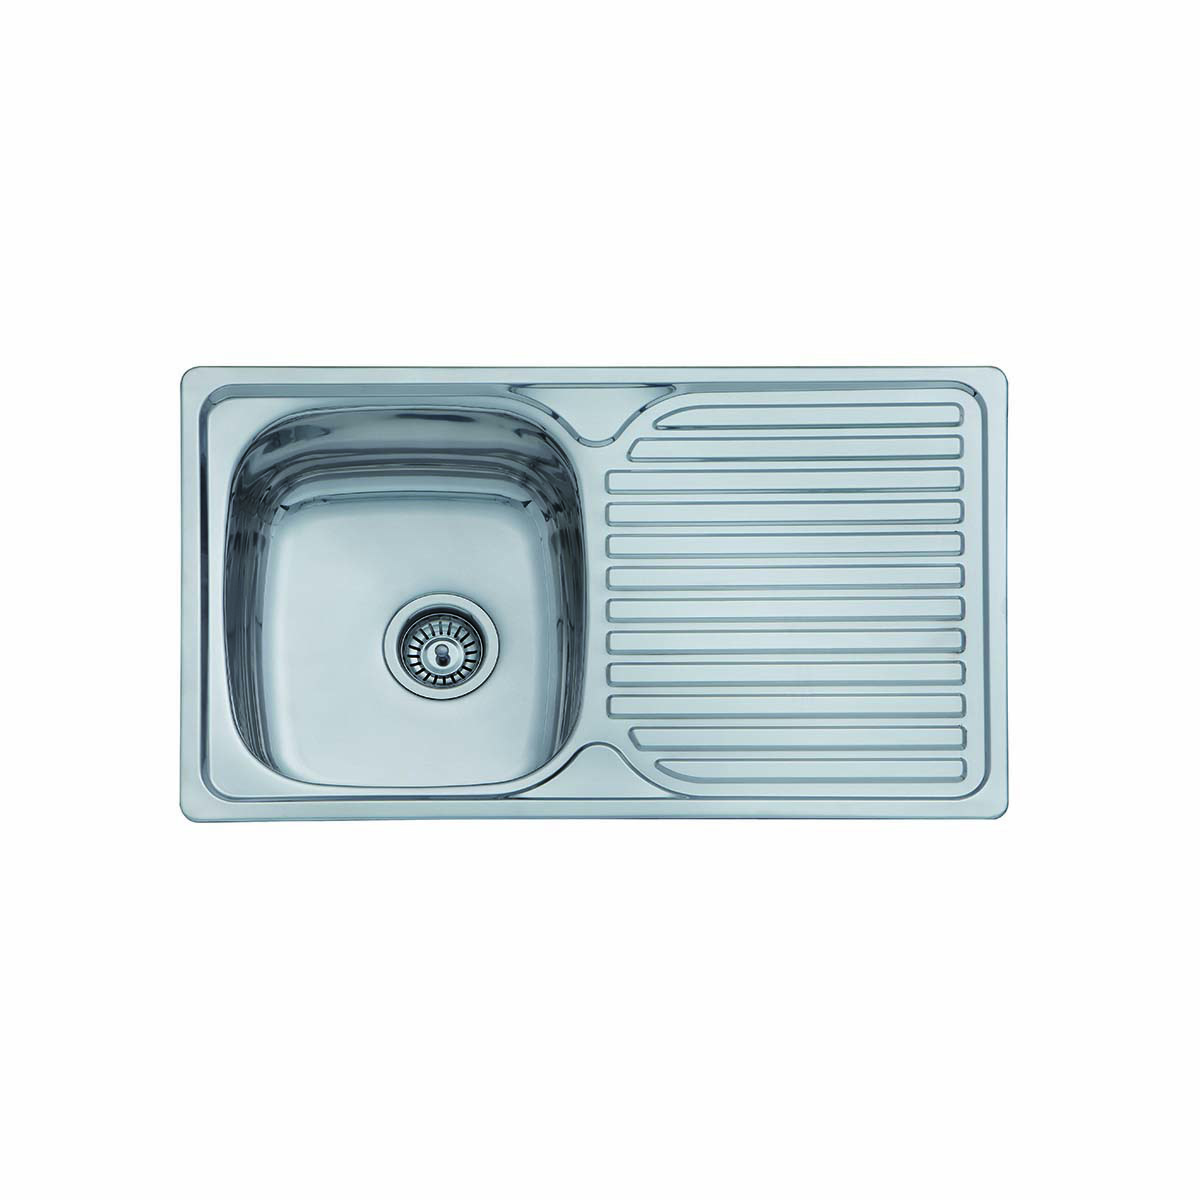 Eirline Single bowl sink with drainer 800 x 480mm